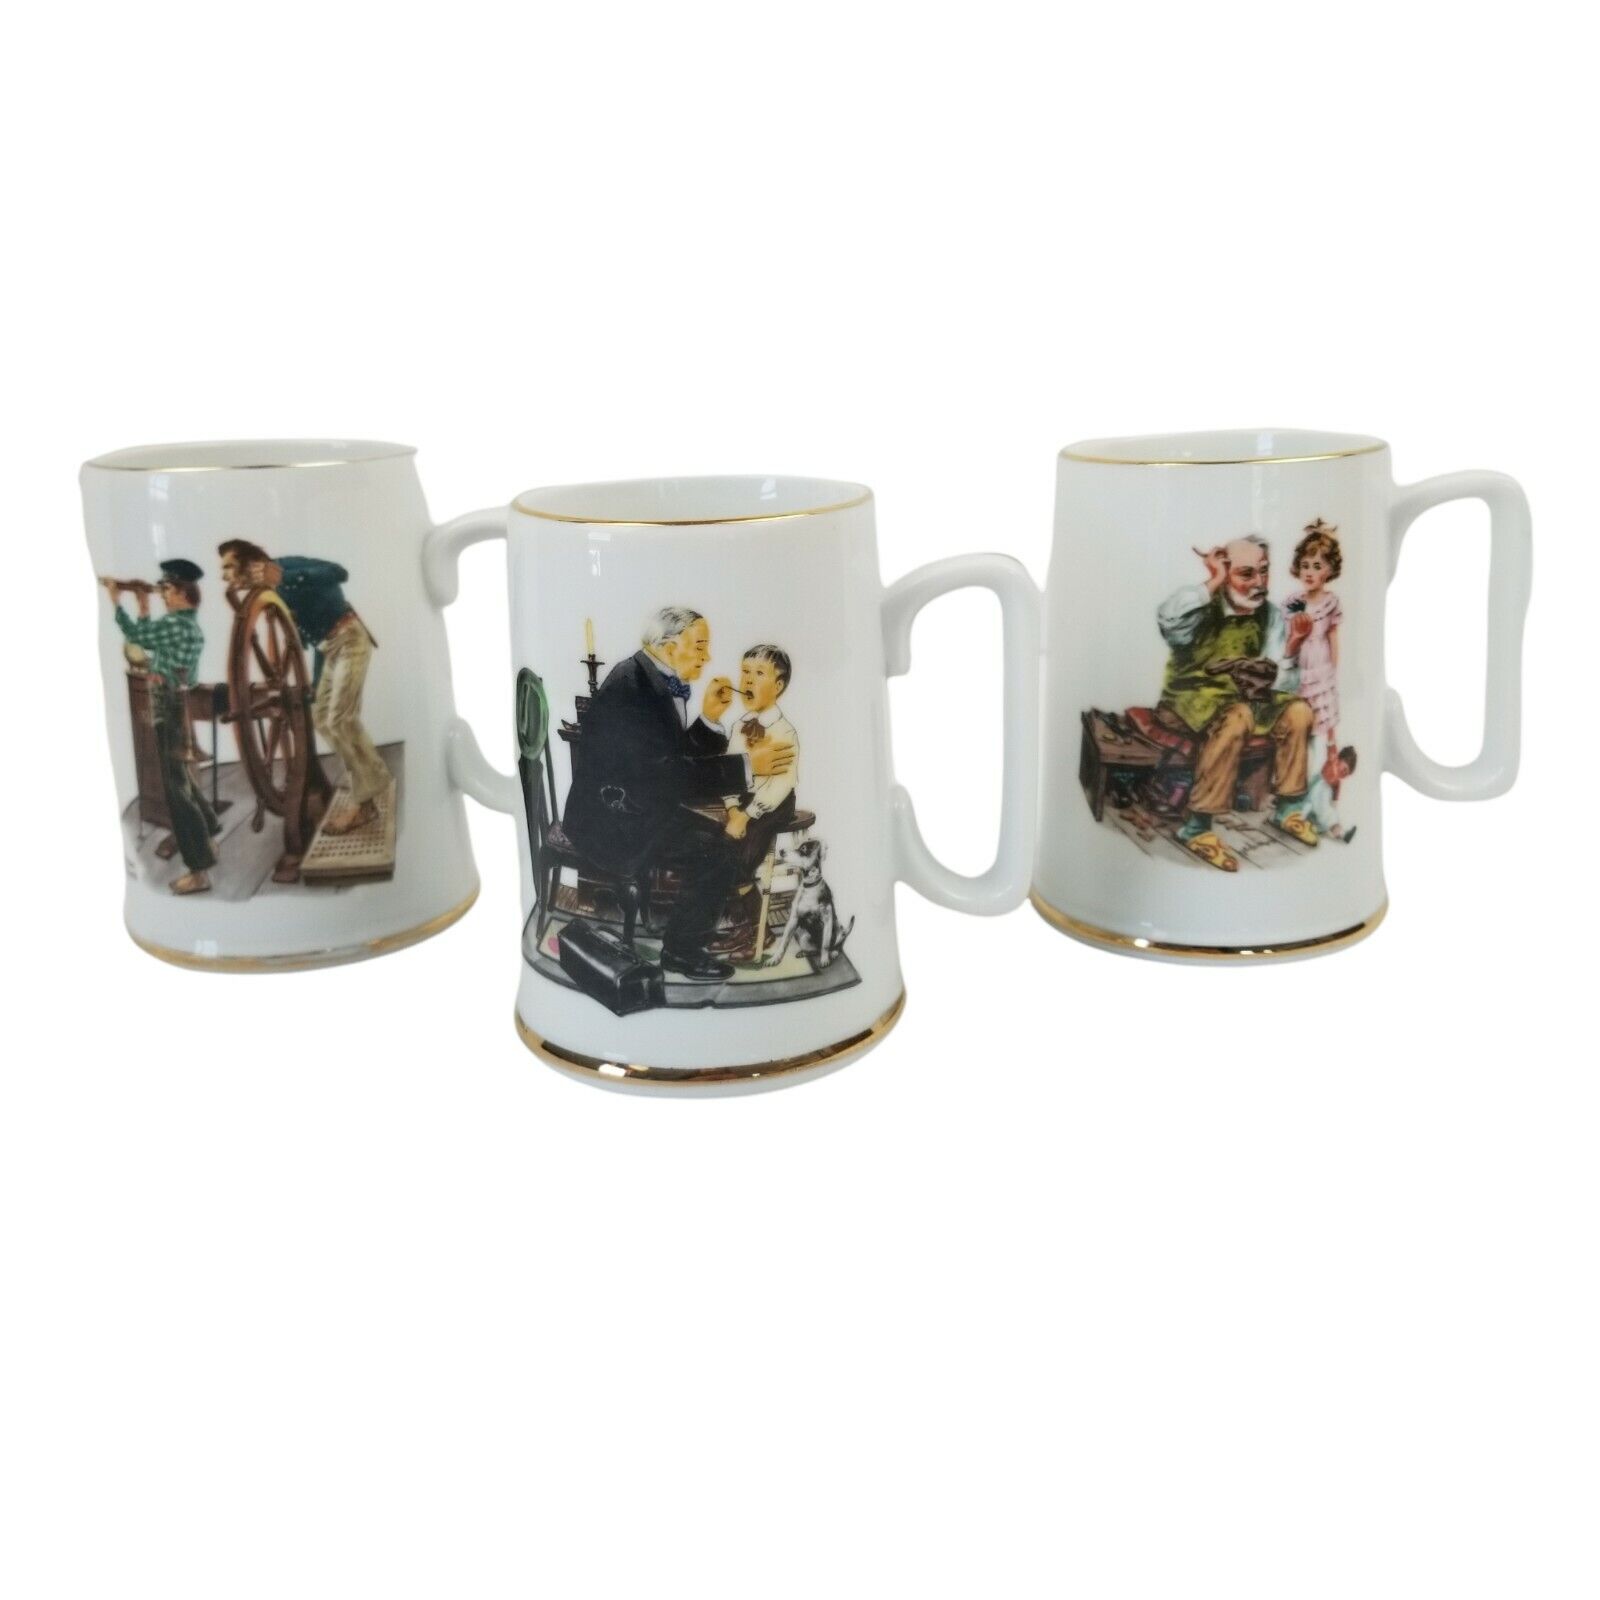 Vintage 1985-86 Norman Rockwell Museum Coffee Mugs Cups Set of 3